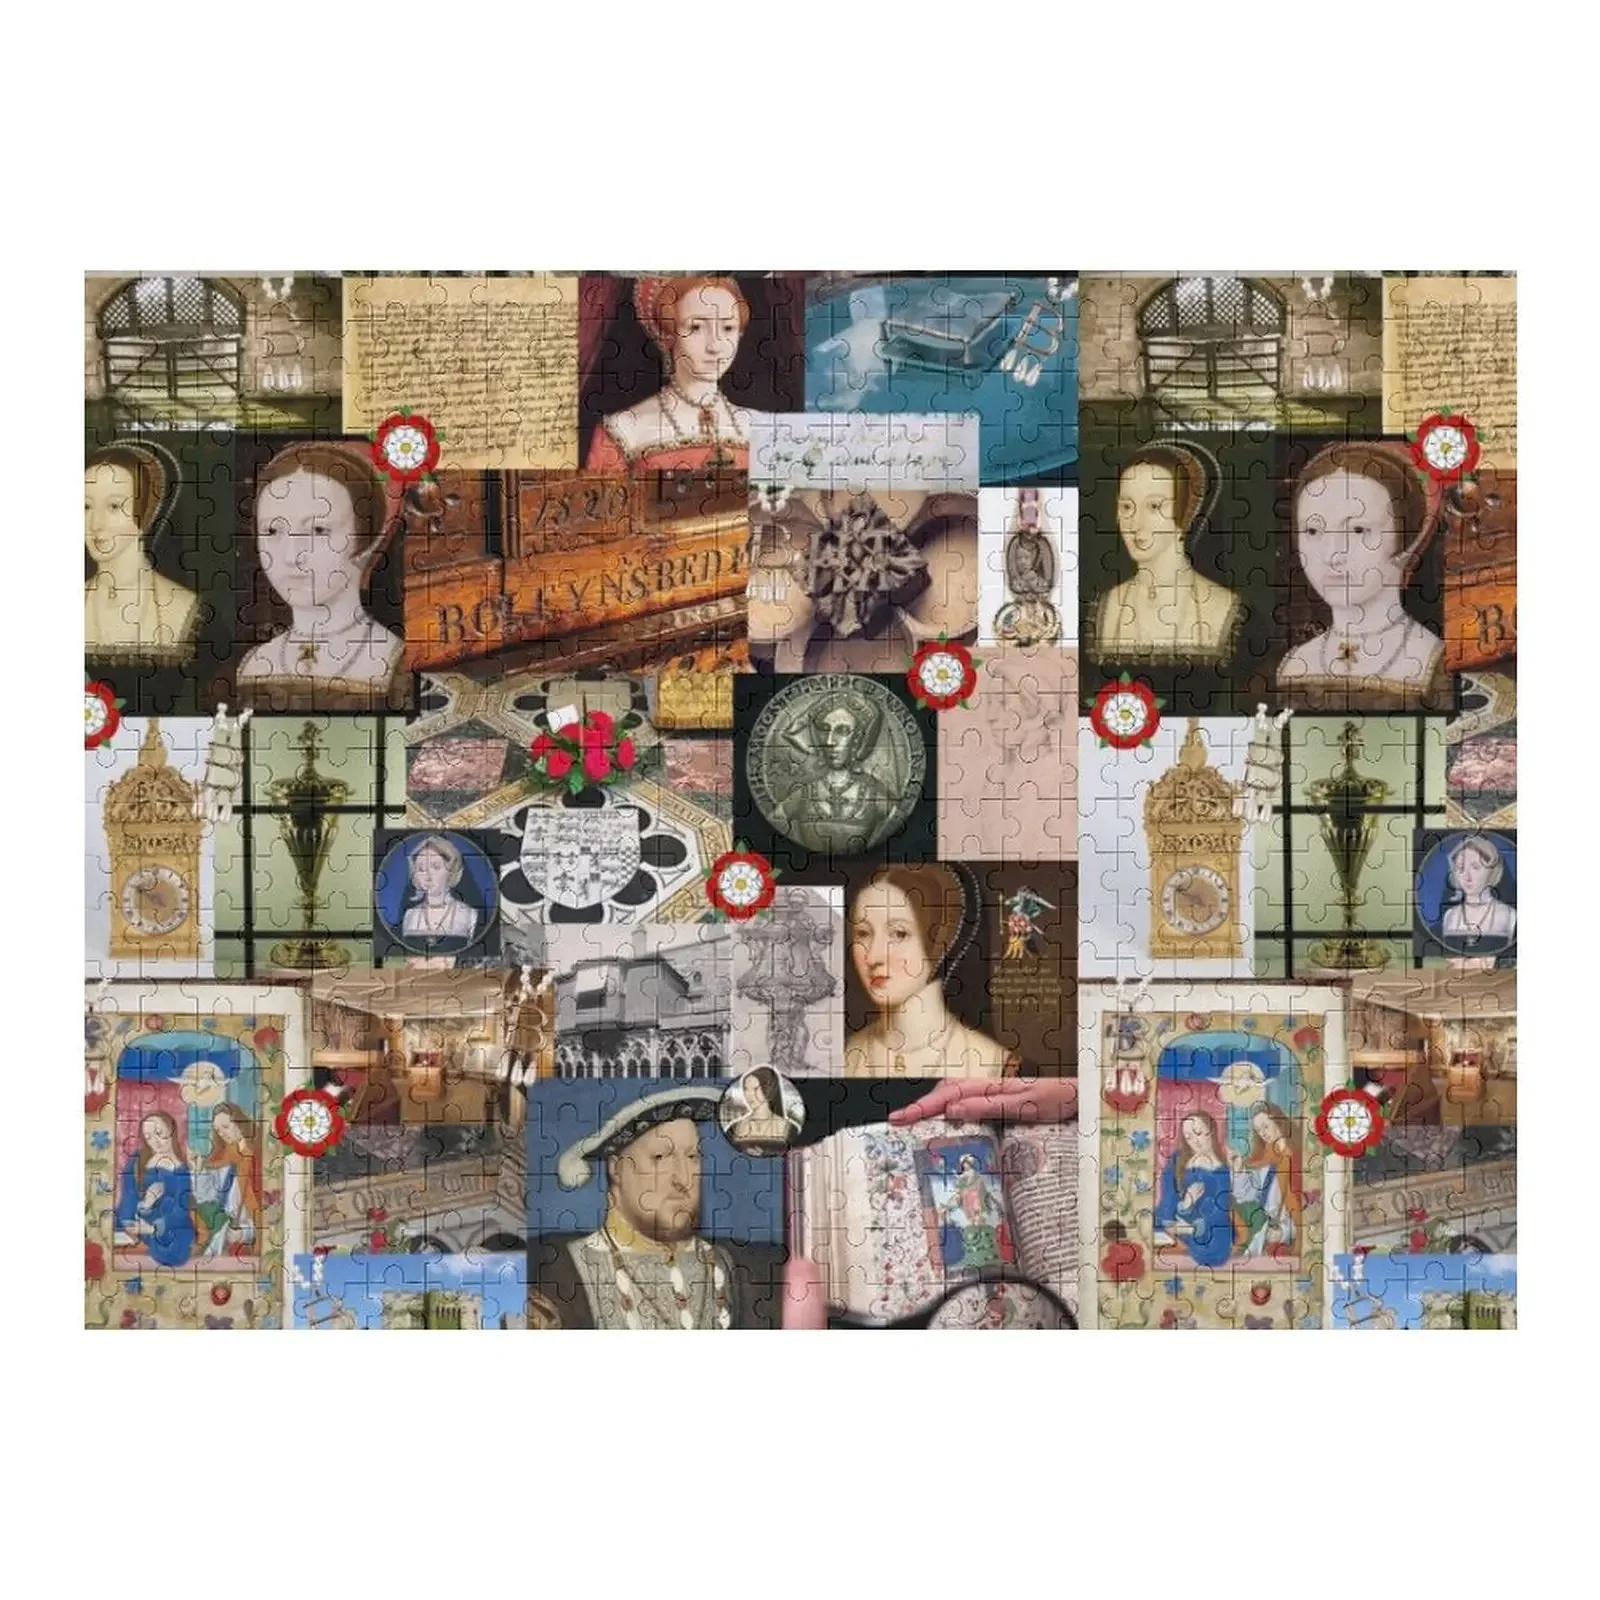 Anne Boleyn Collage Jigsaw Puzzle Woodens For Adults Wooden Decor Paintings Name Wooden Toy Puzzle